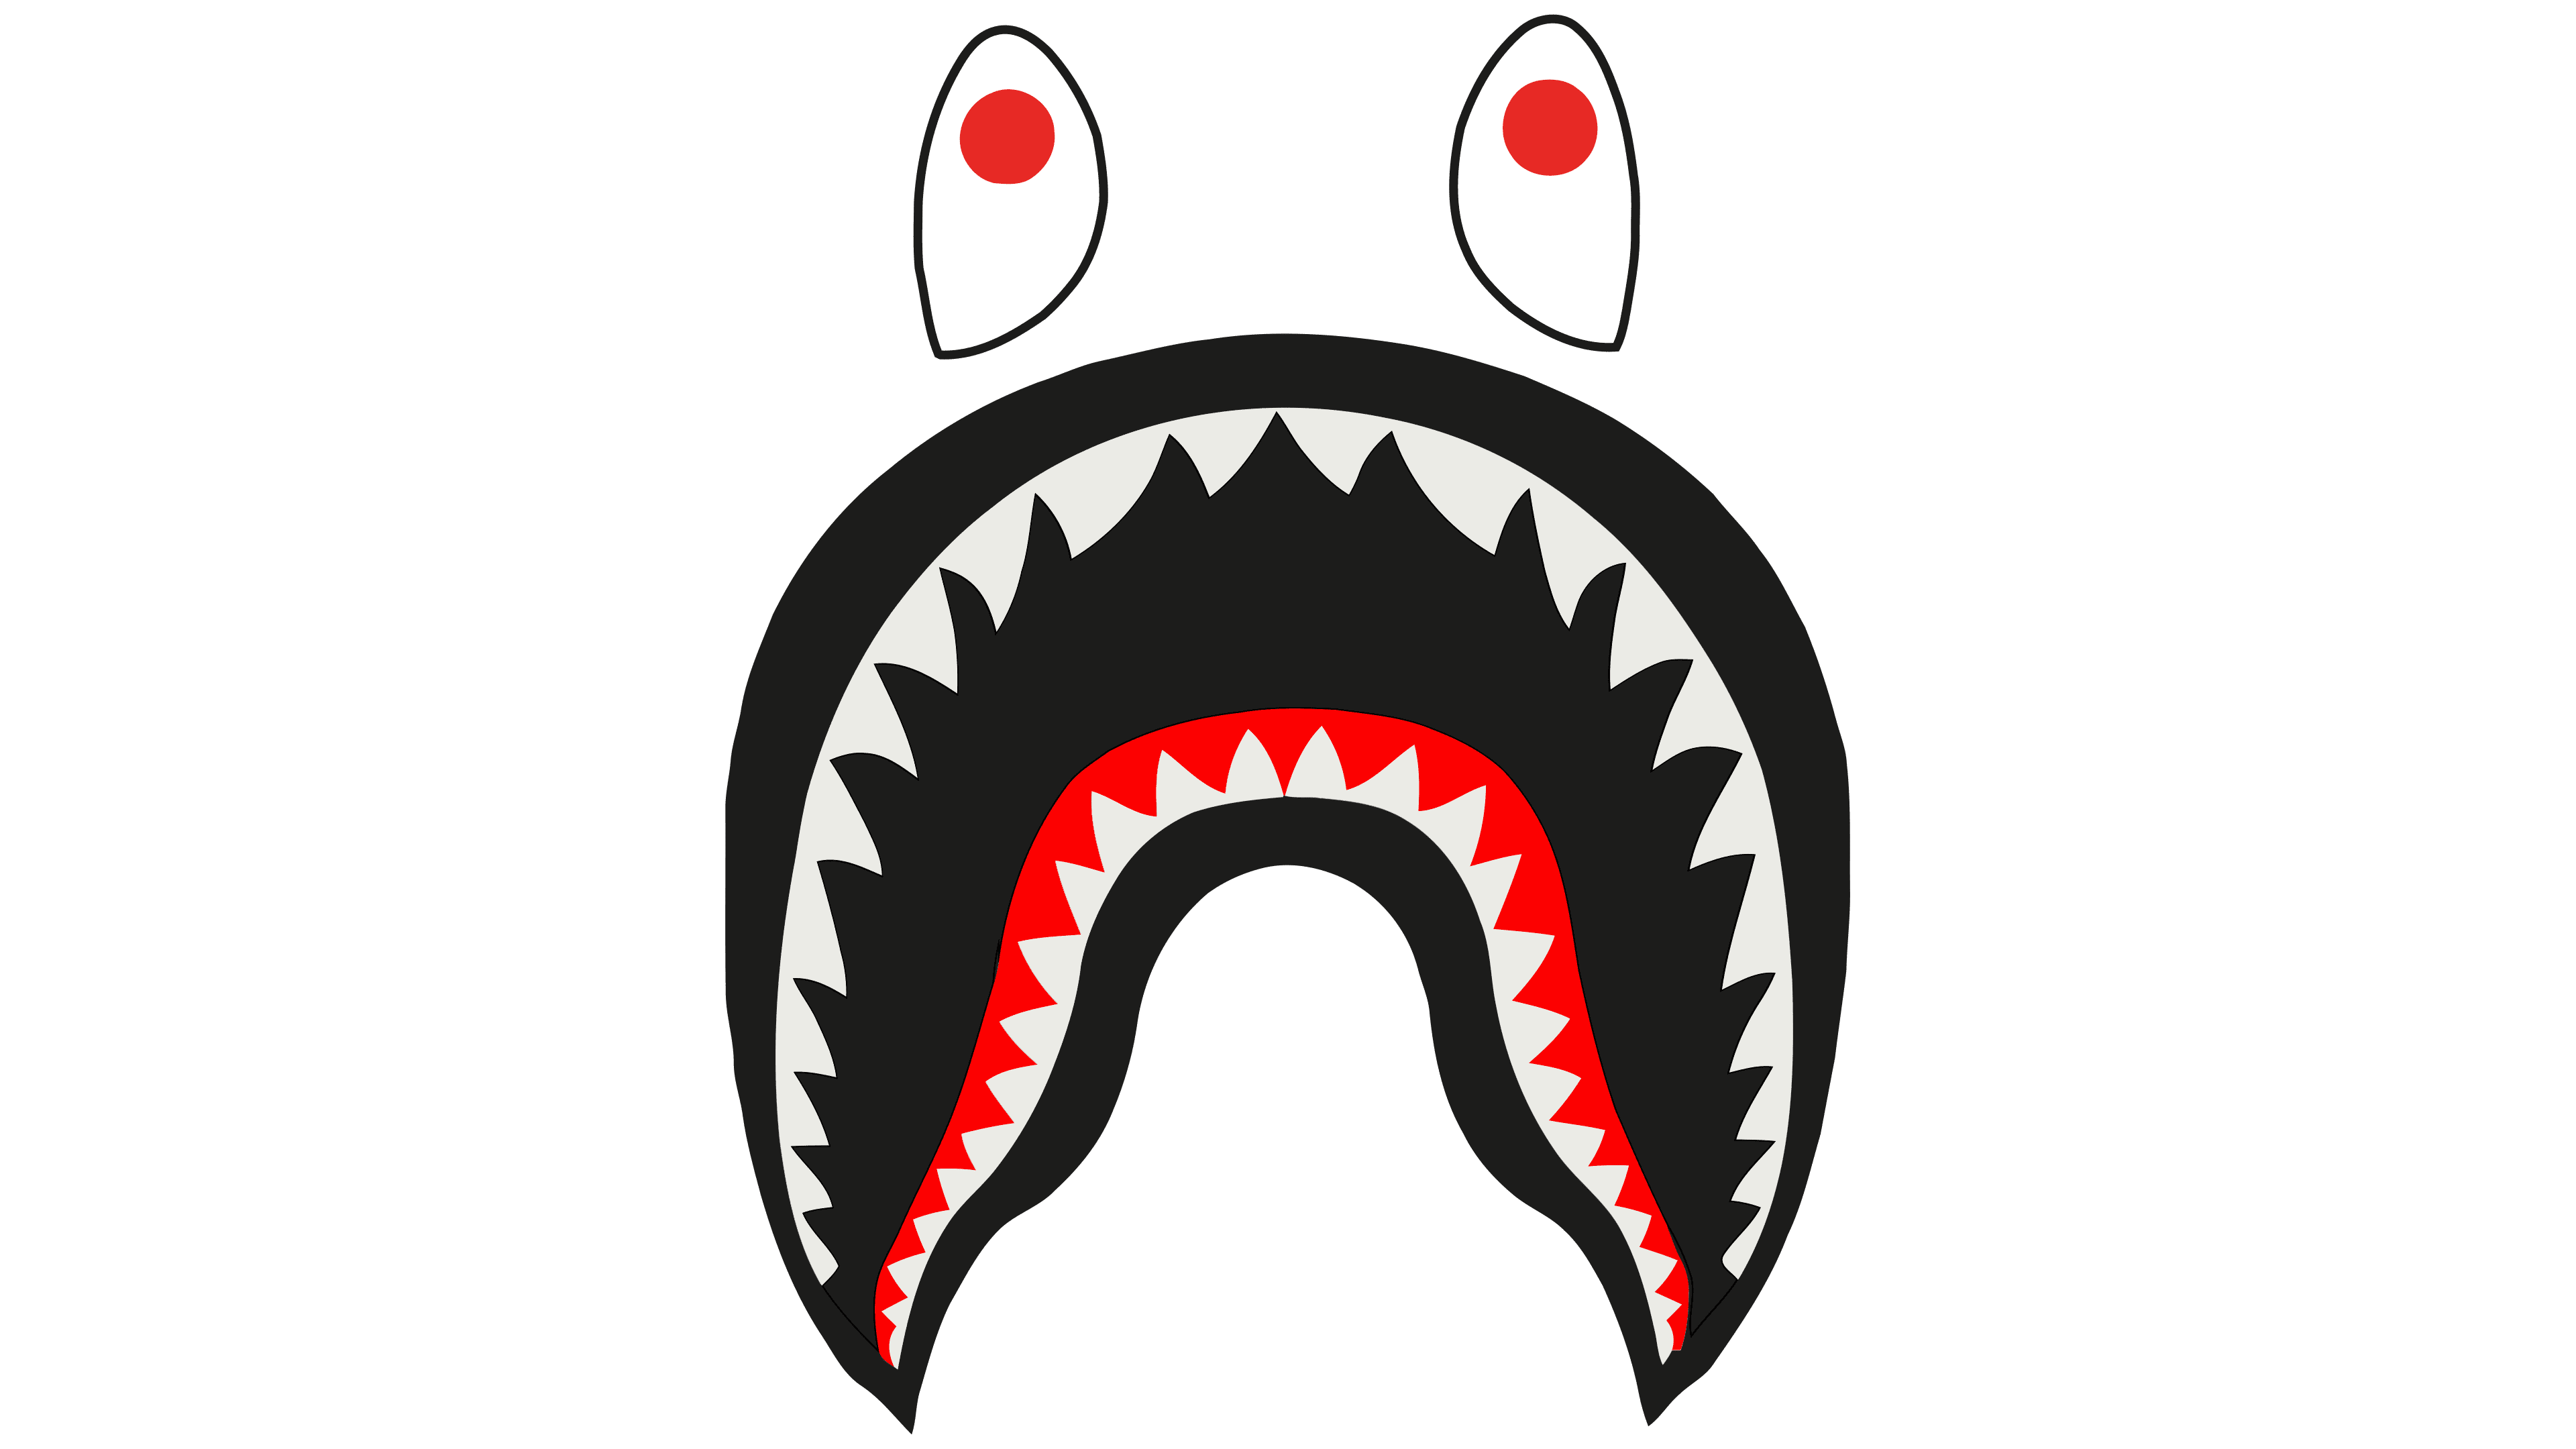 Black Shark logo and symbol, meaning, history, PNG